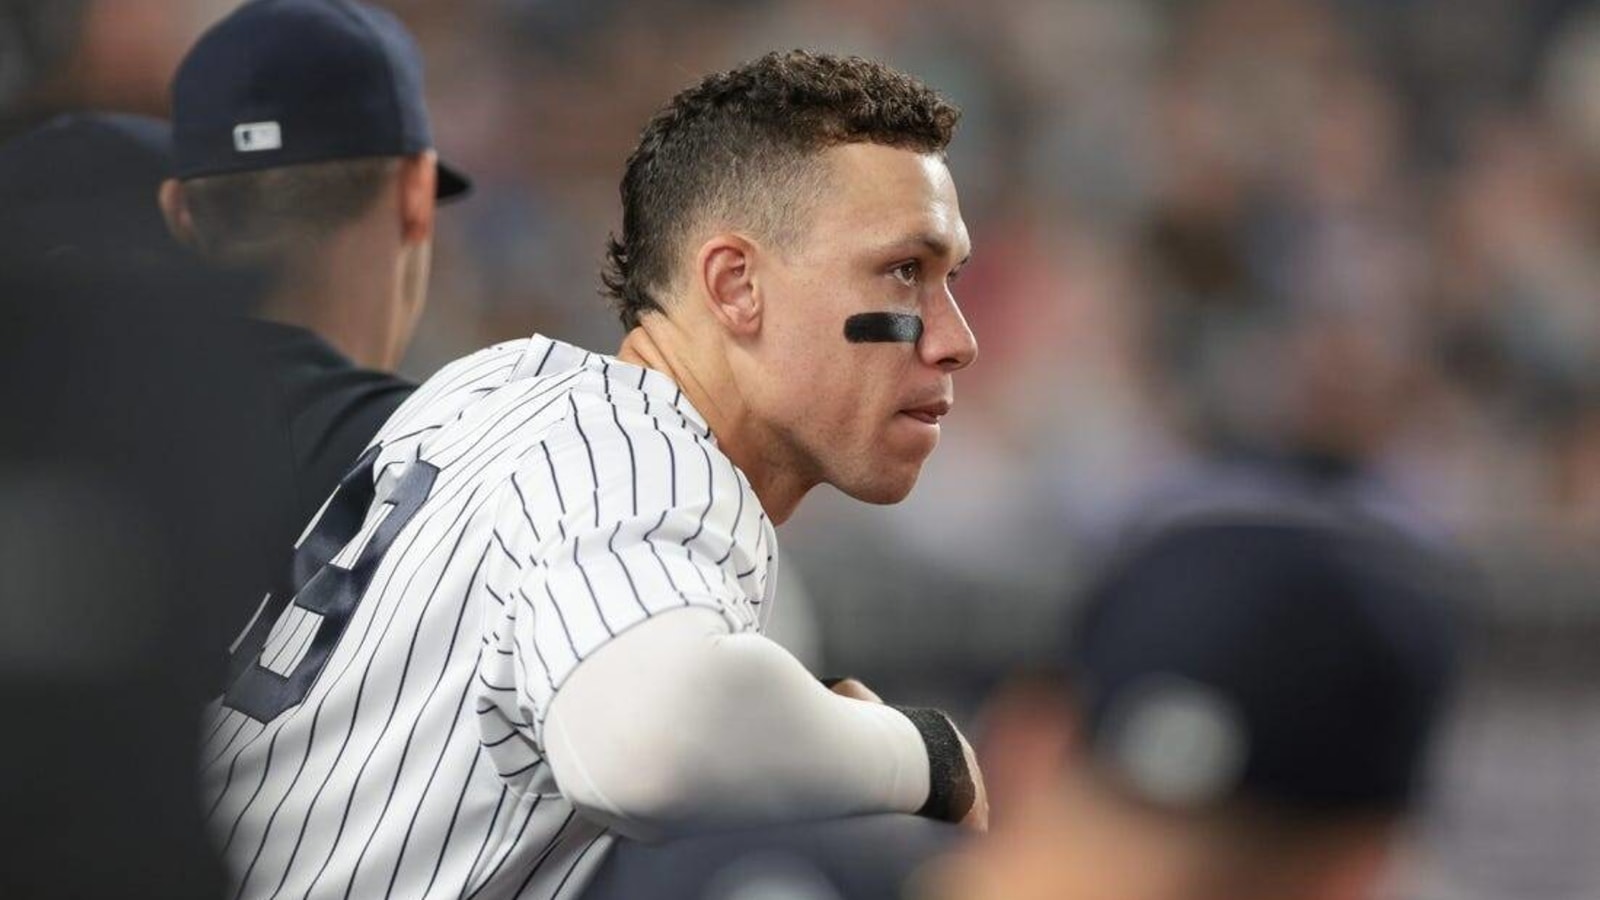 Tampa Bay Rays vs. New York Yankees prediction and odds Tue., 8/16: Yanks seek redemption